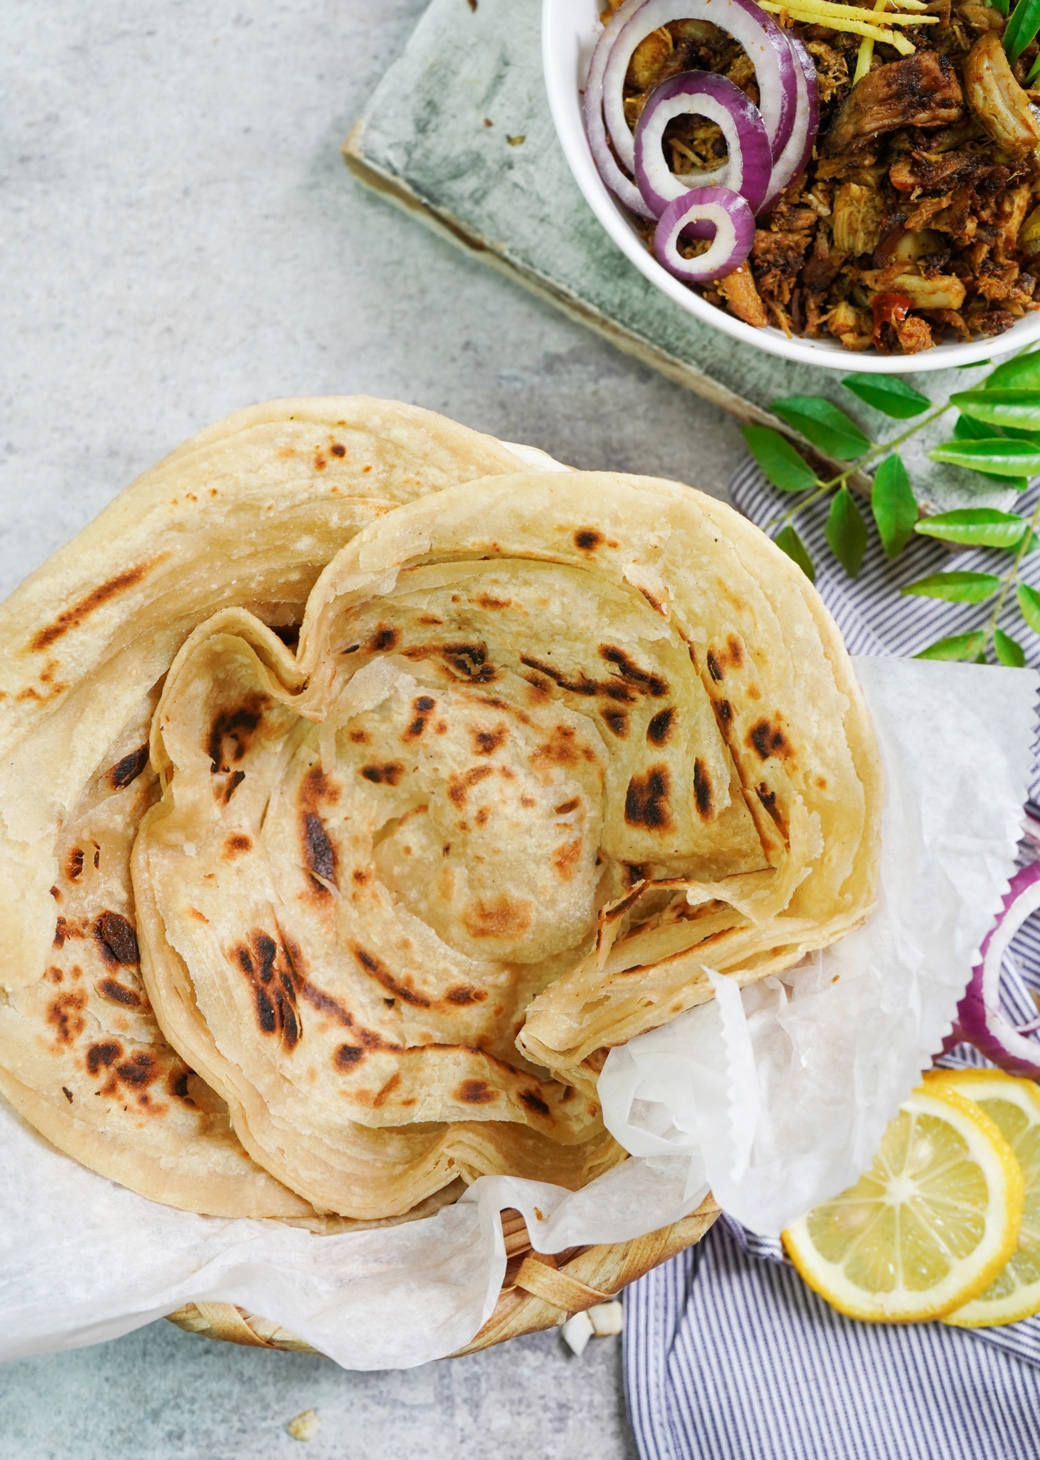 4 Traditional Indian Flatbread Recipes to Try RN